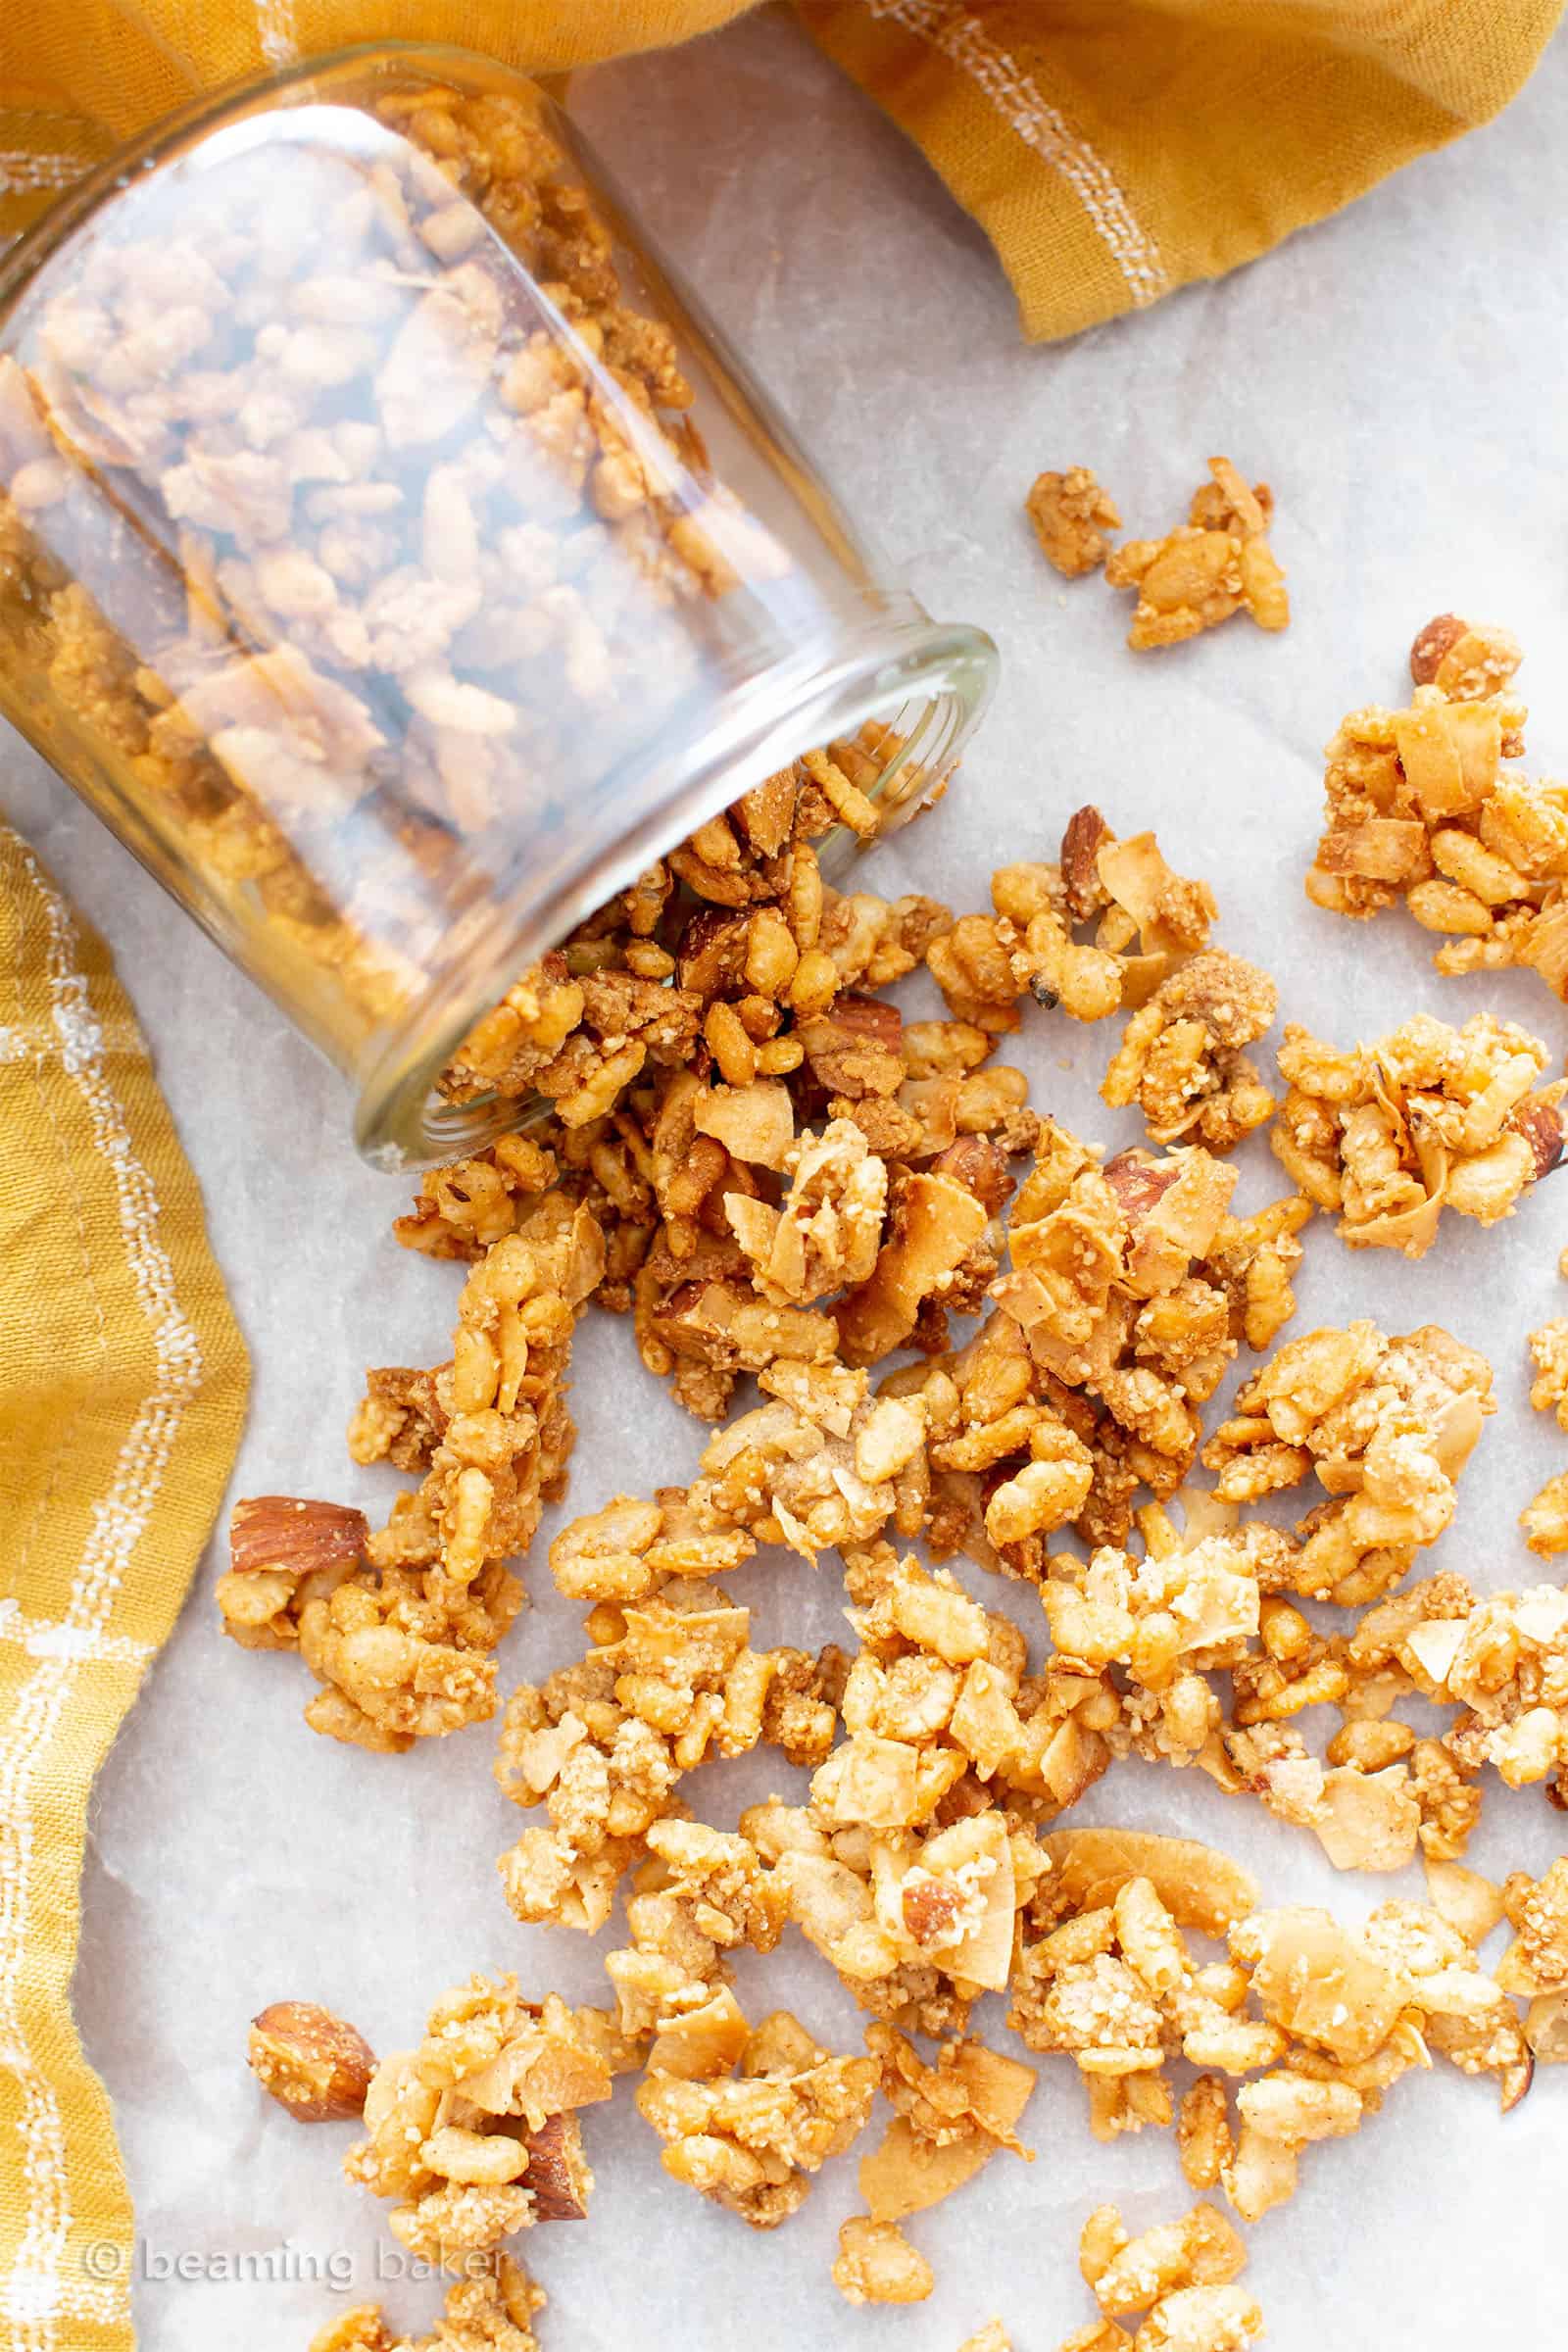 Low Calorie Granola: 5 mins of prep for the best low carb, low sugar, low fat granola! Crispy, crunchy and perfectly sweet. Only 74 calories, 3.6g of sugar and 7g carbs per serving. #LowCalorie #Granola #LowCarb #LowFat #LowSugar | Recipe at BeamingBaker.com